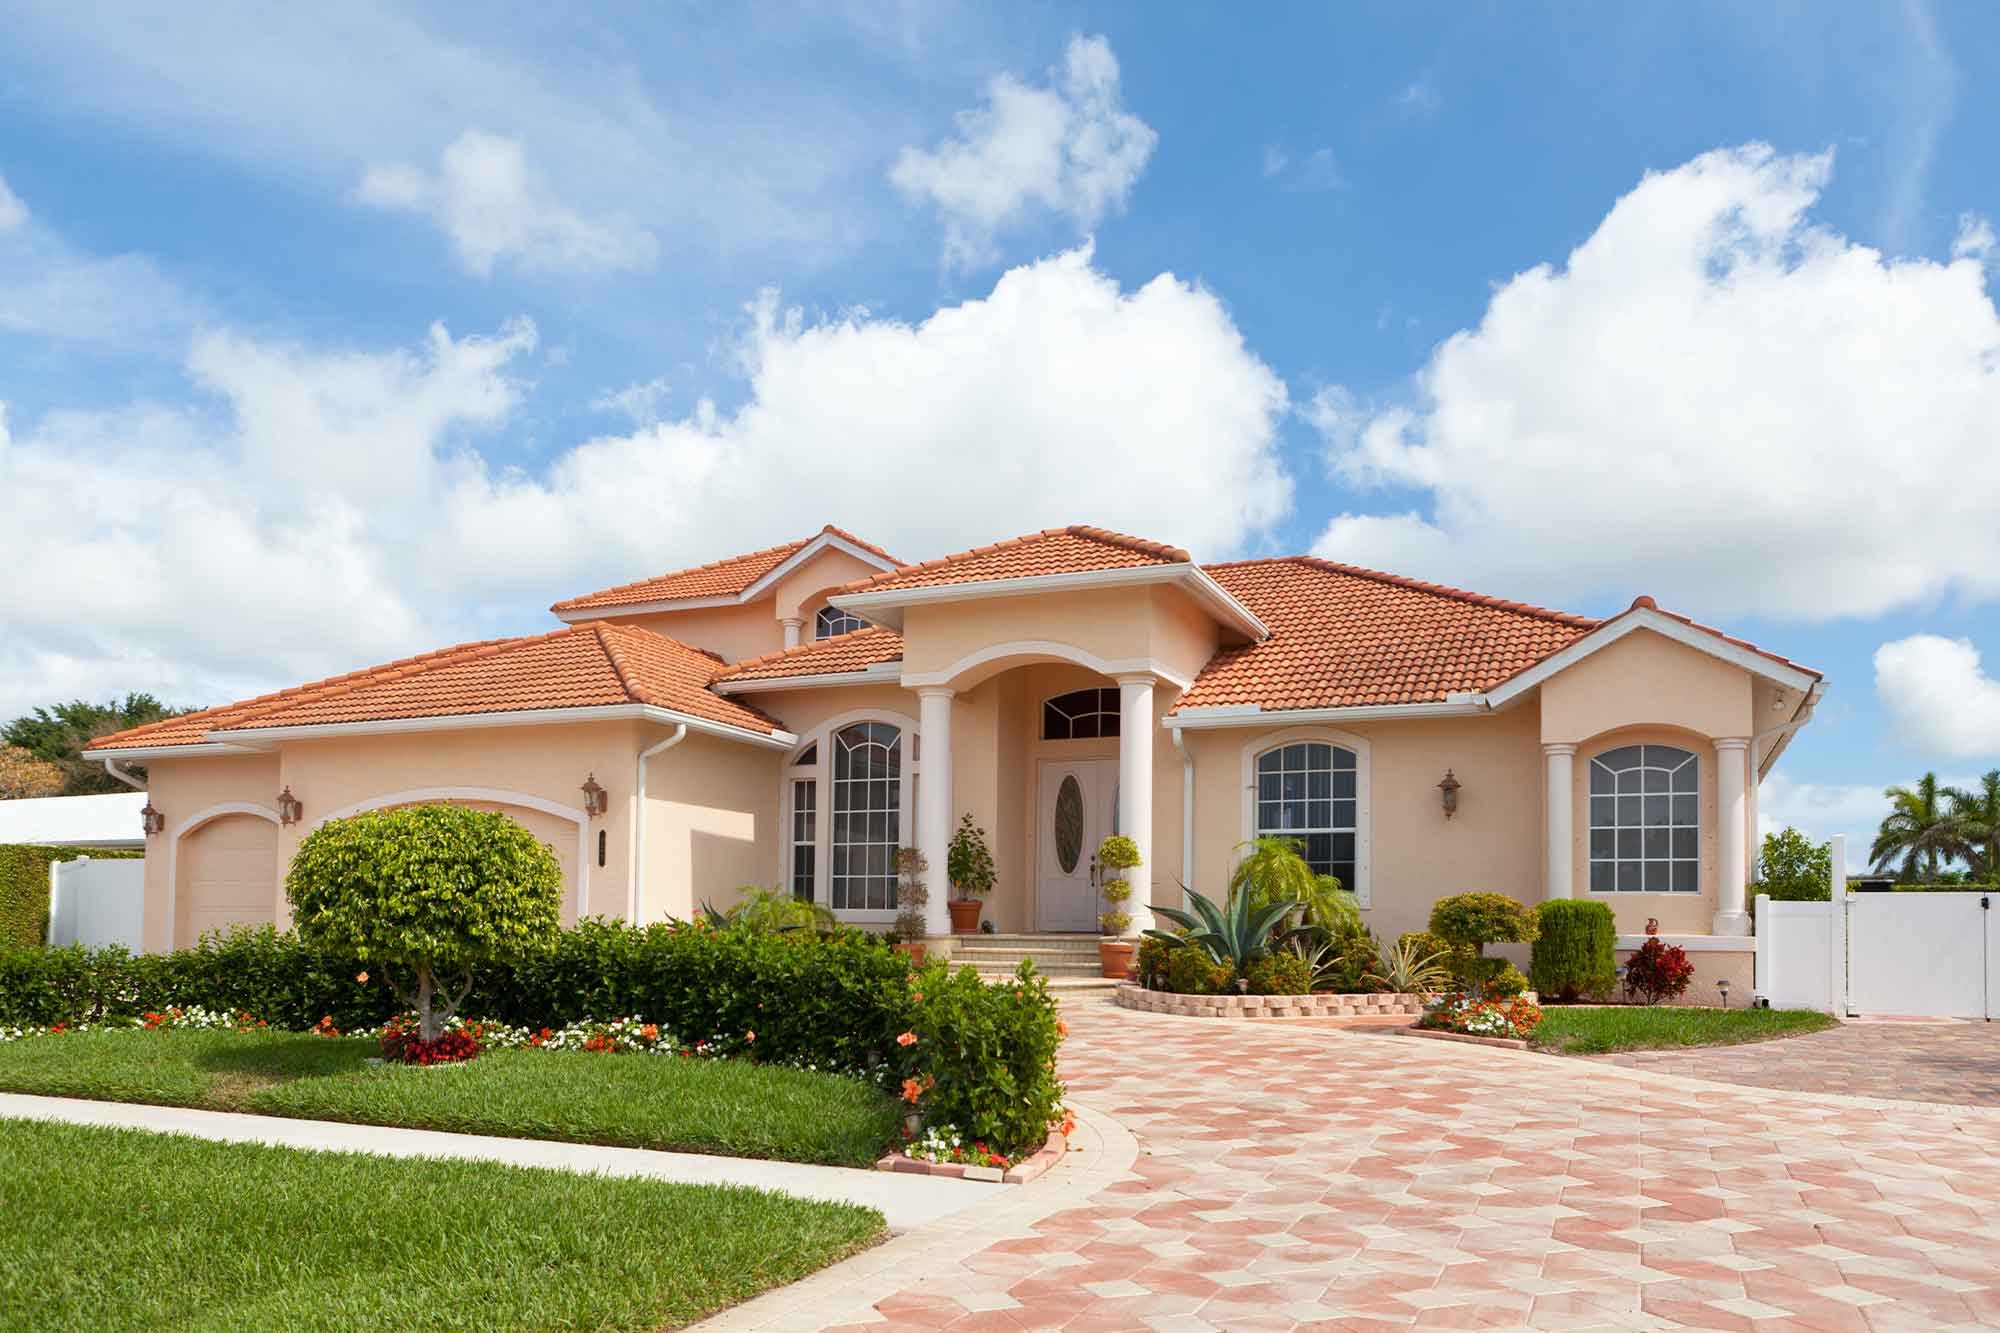 A beautiful Florida home with a green lawn, paved driveway, and blue sky.